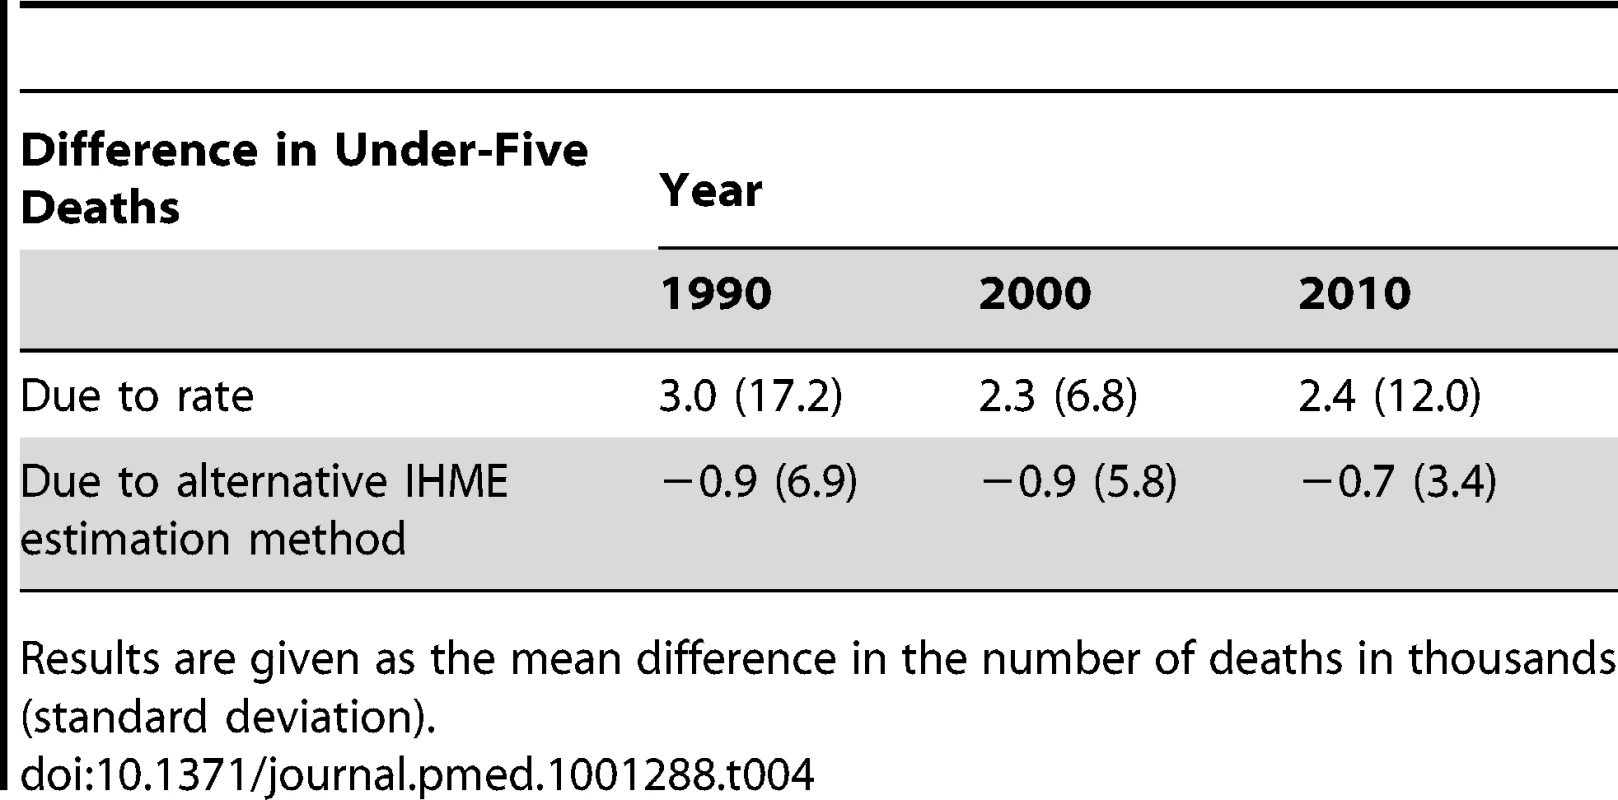 Summary of decomposition results: mean differences in under-five deaths in 1990, 2000, and 2010.